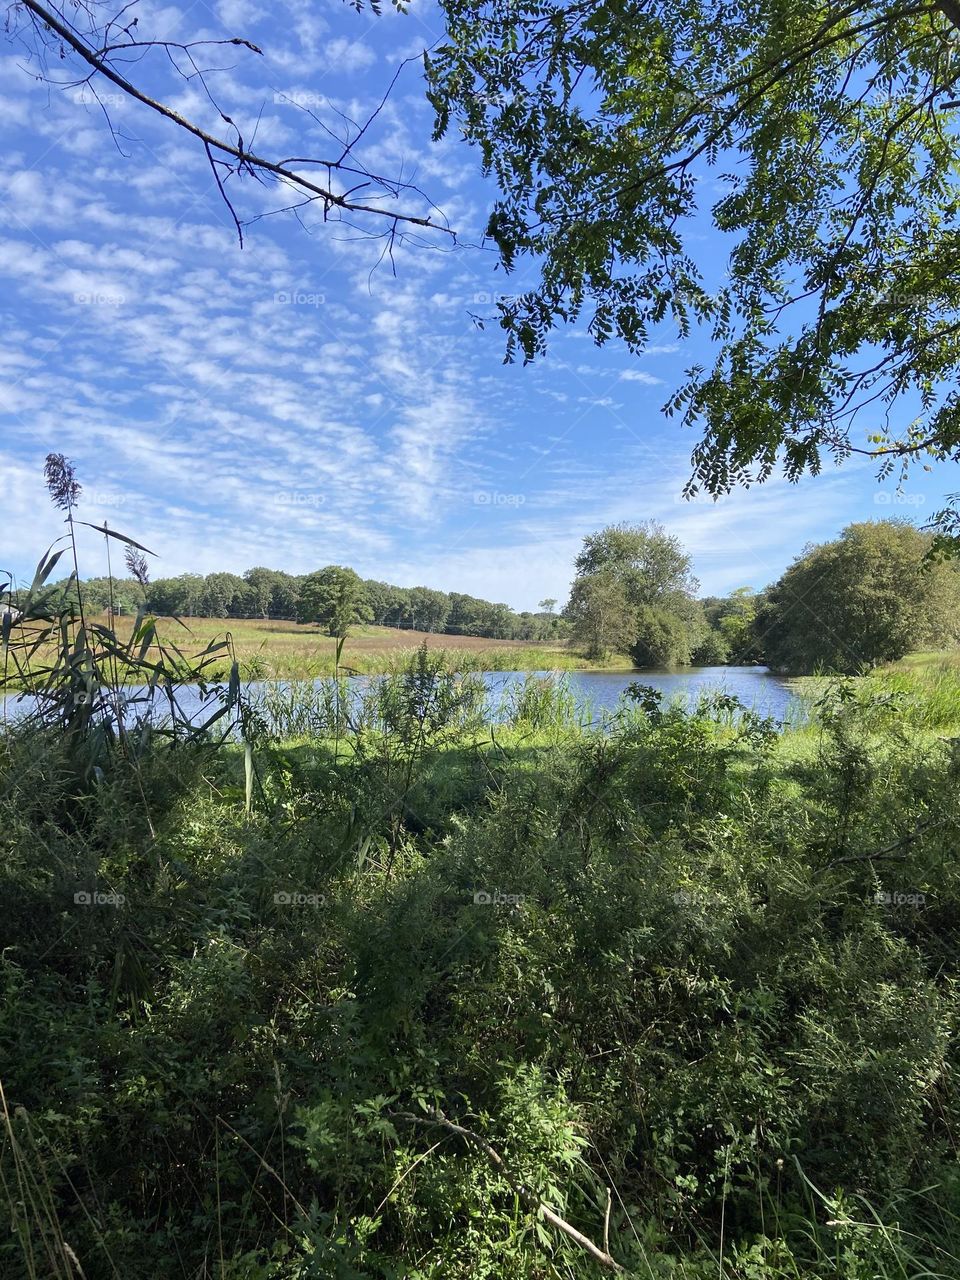 A scenic photo with lot of trees, grass, brush and water in the distance. Varying shades of green and blue make for a peaceful, calming scene. 